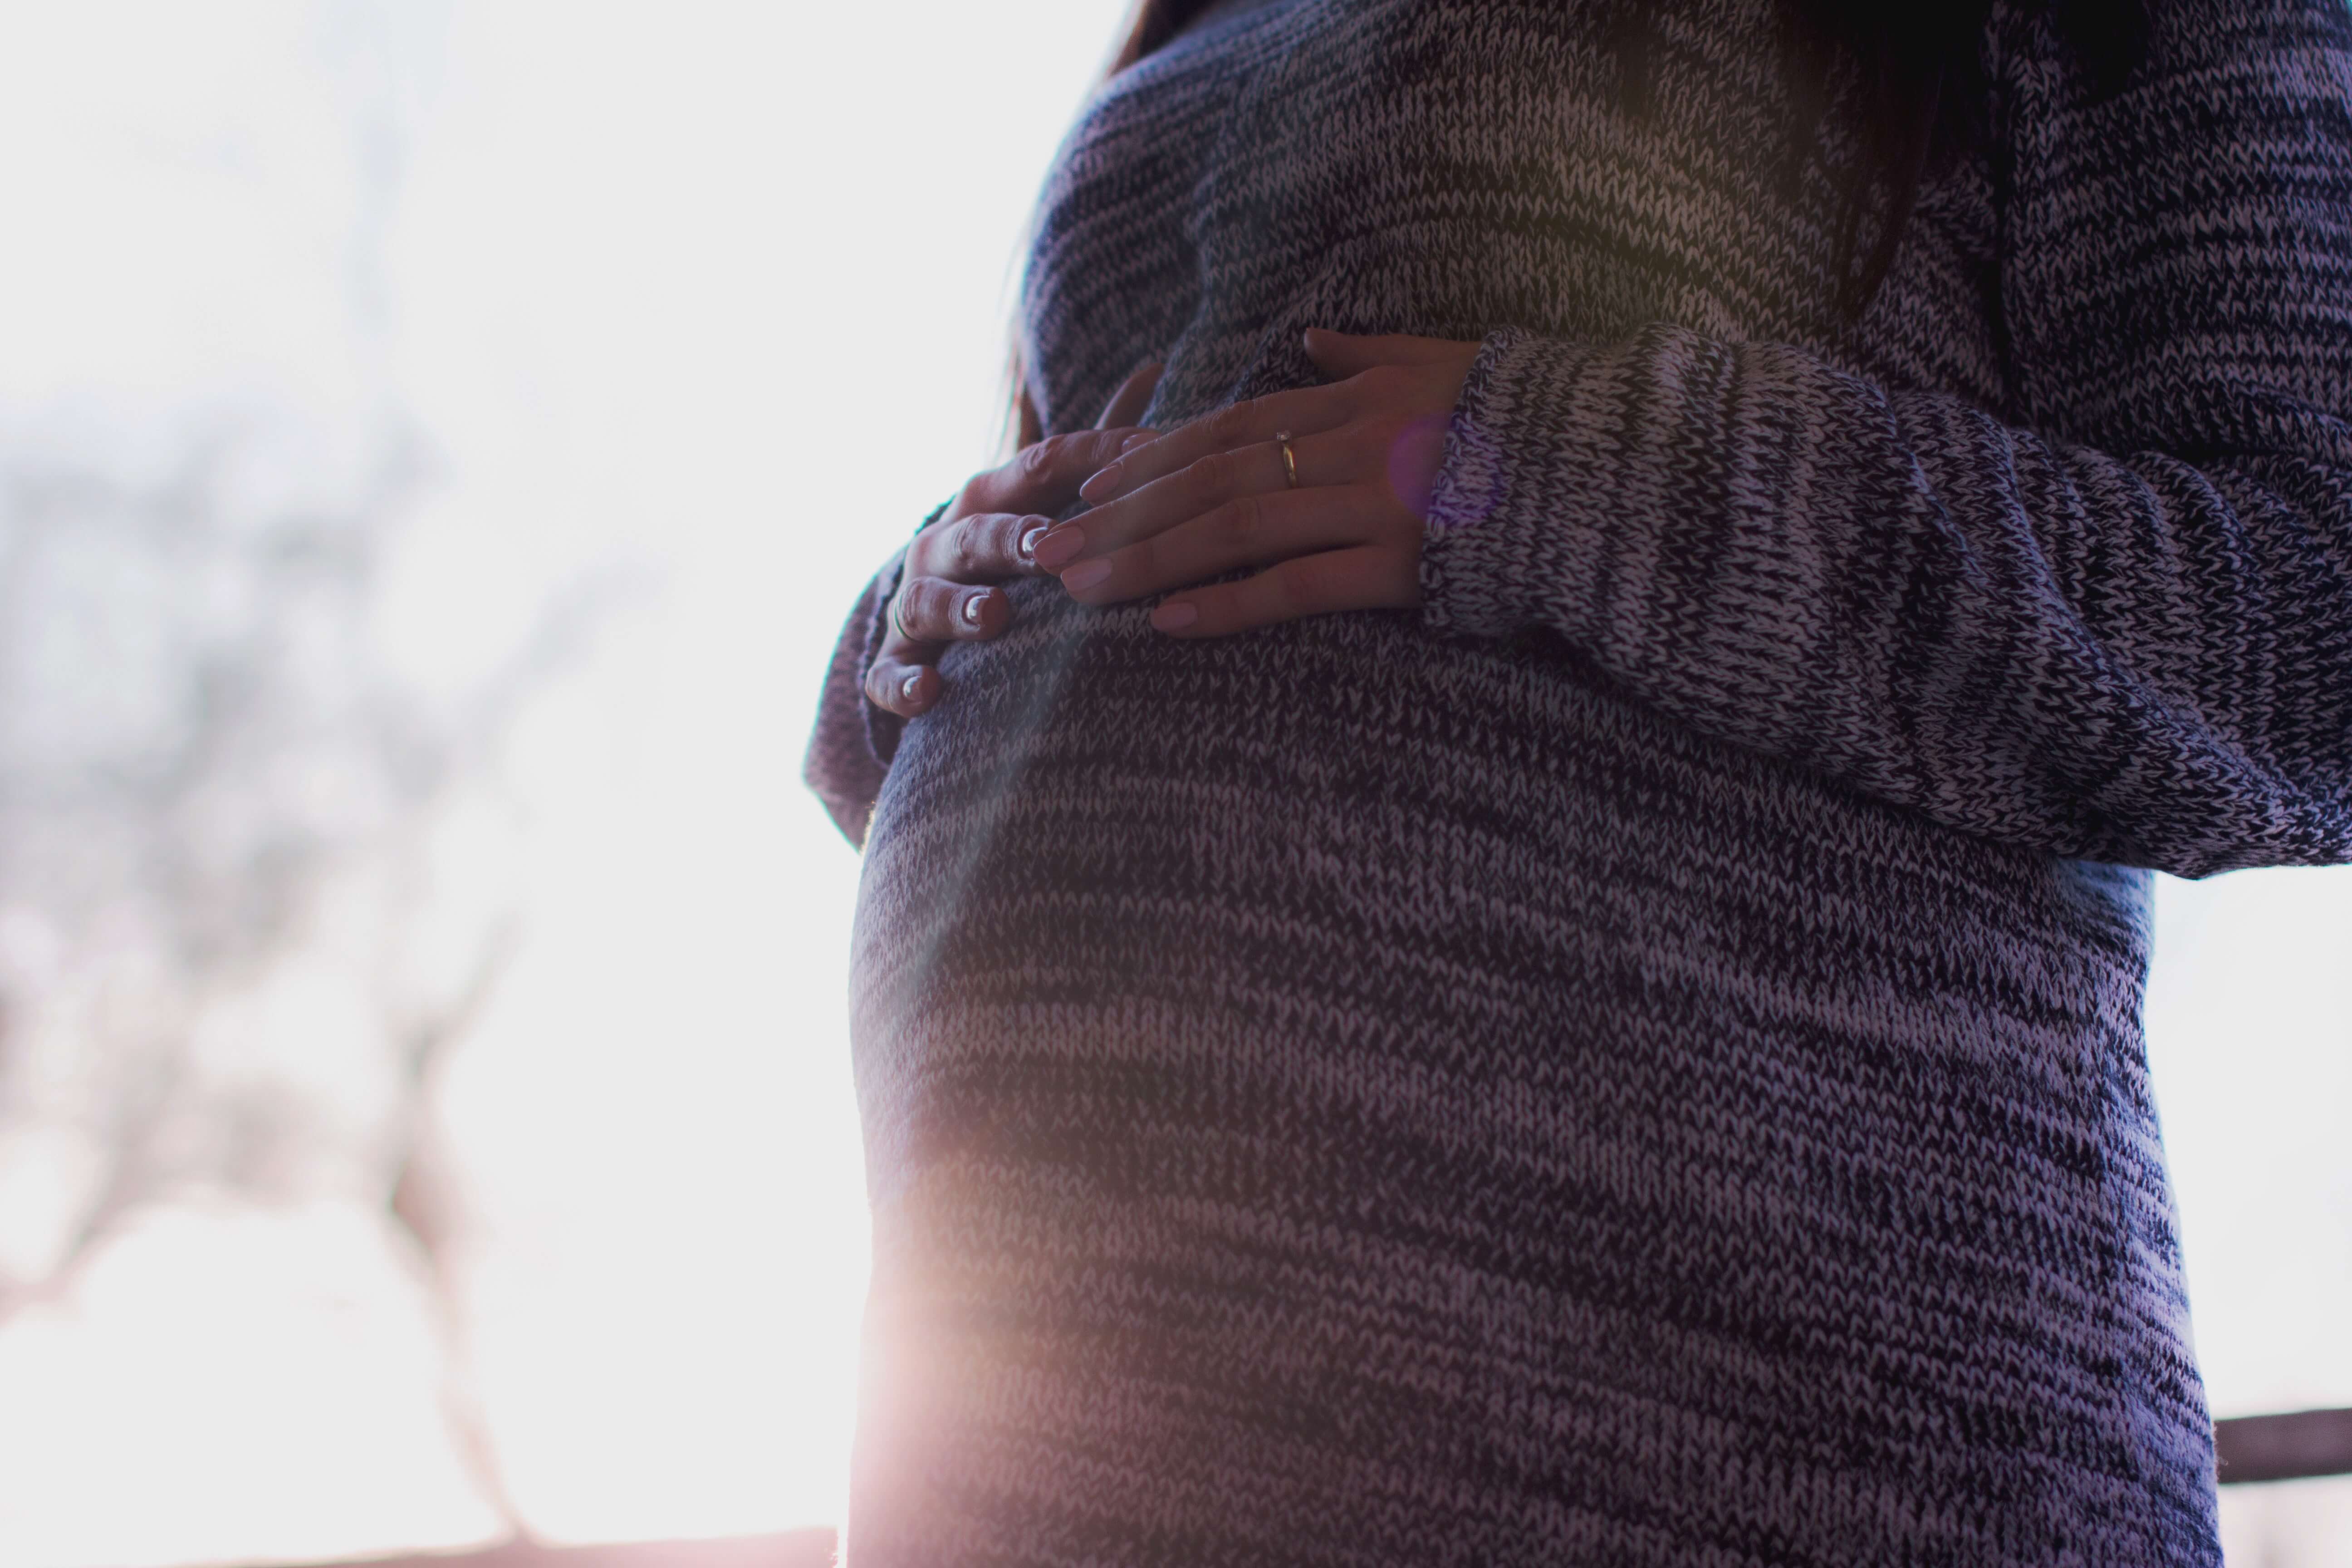 pregnant-woman-wearing-marled-gray-sweater-touching-her-54289